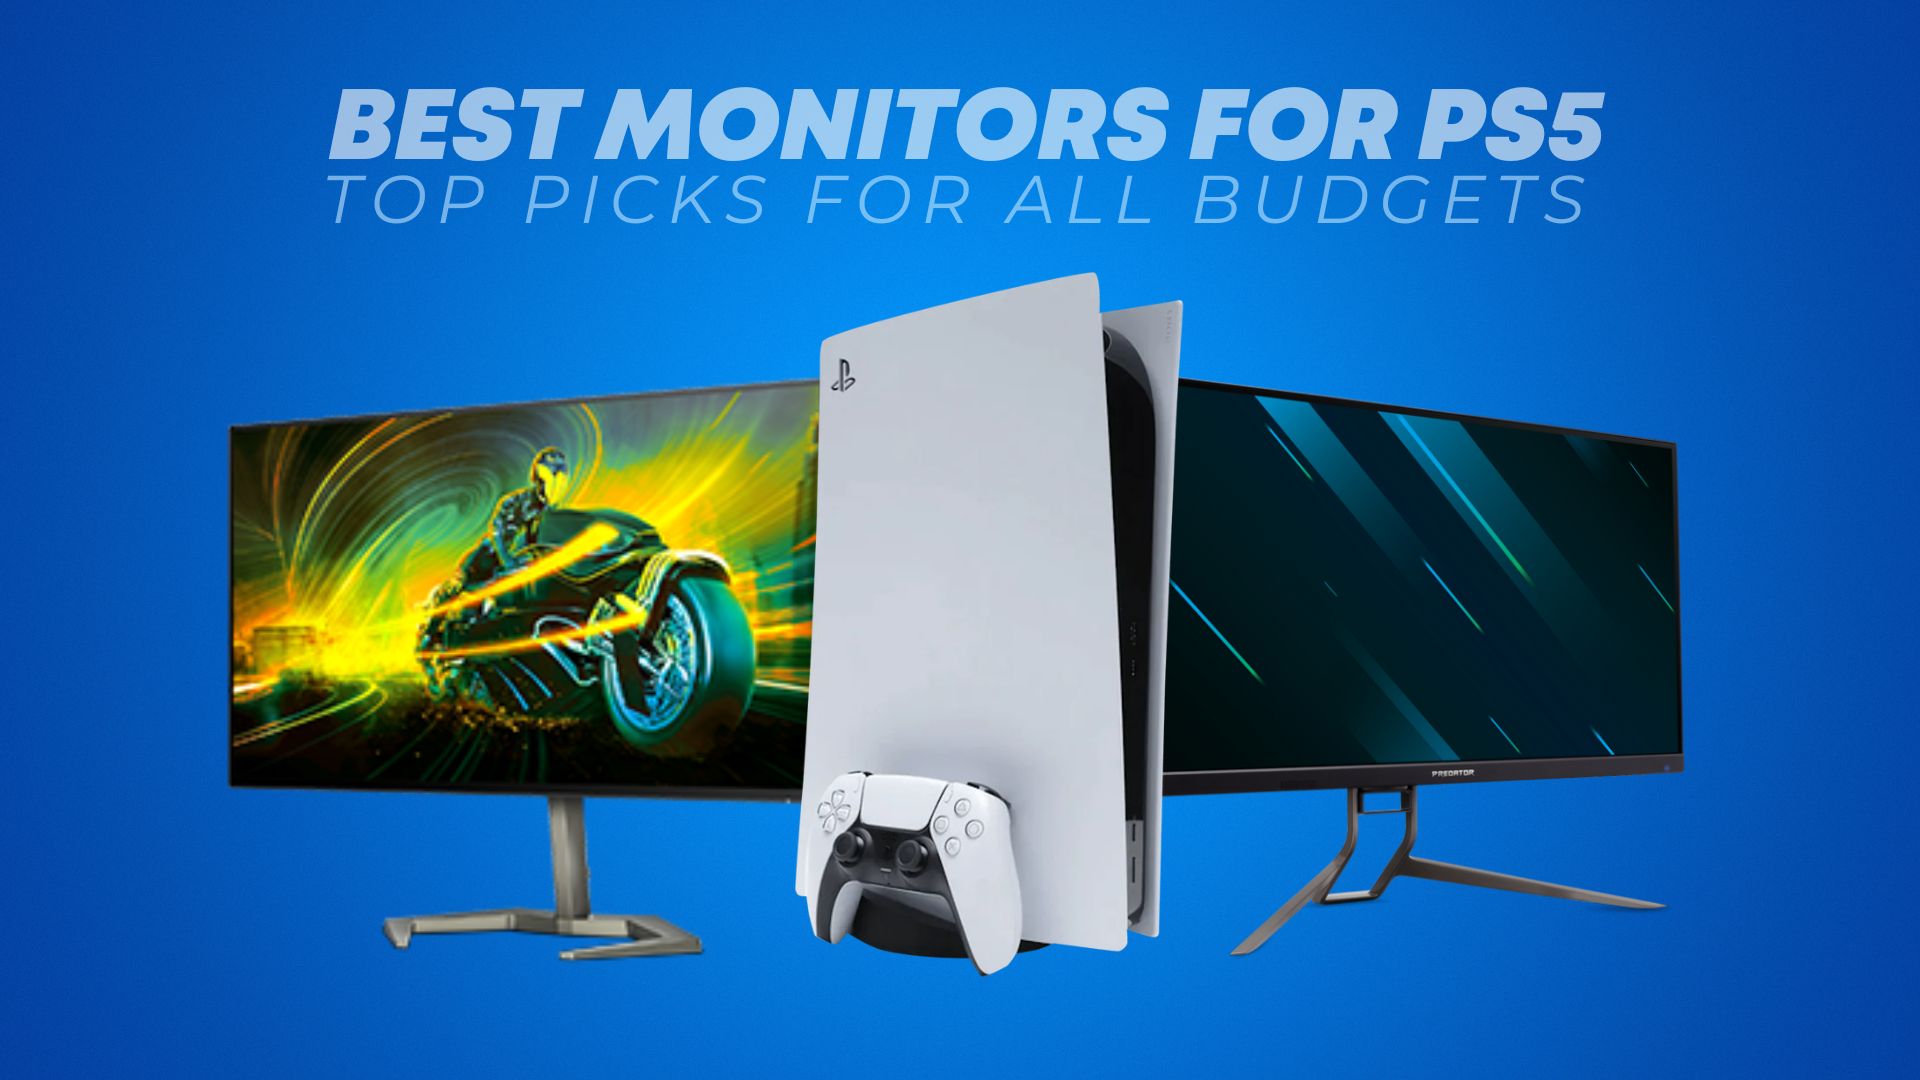 Best Monitors for PS5